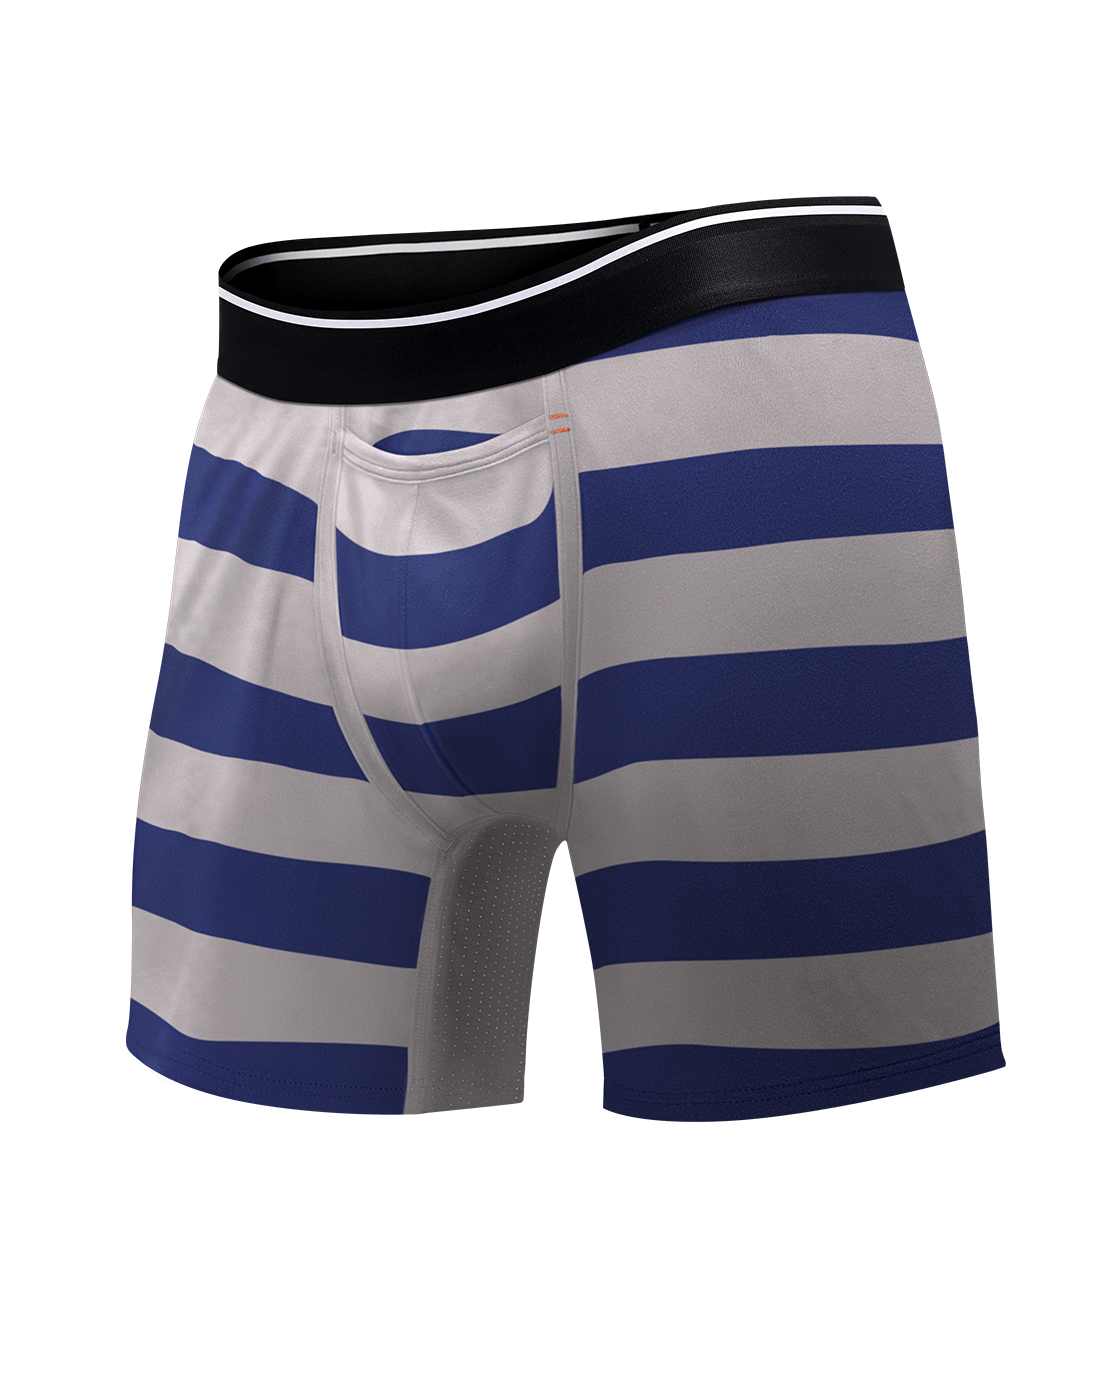 ANY-WEAR™ Boxer, Smart Apparel